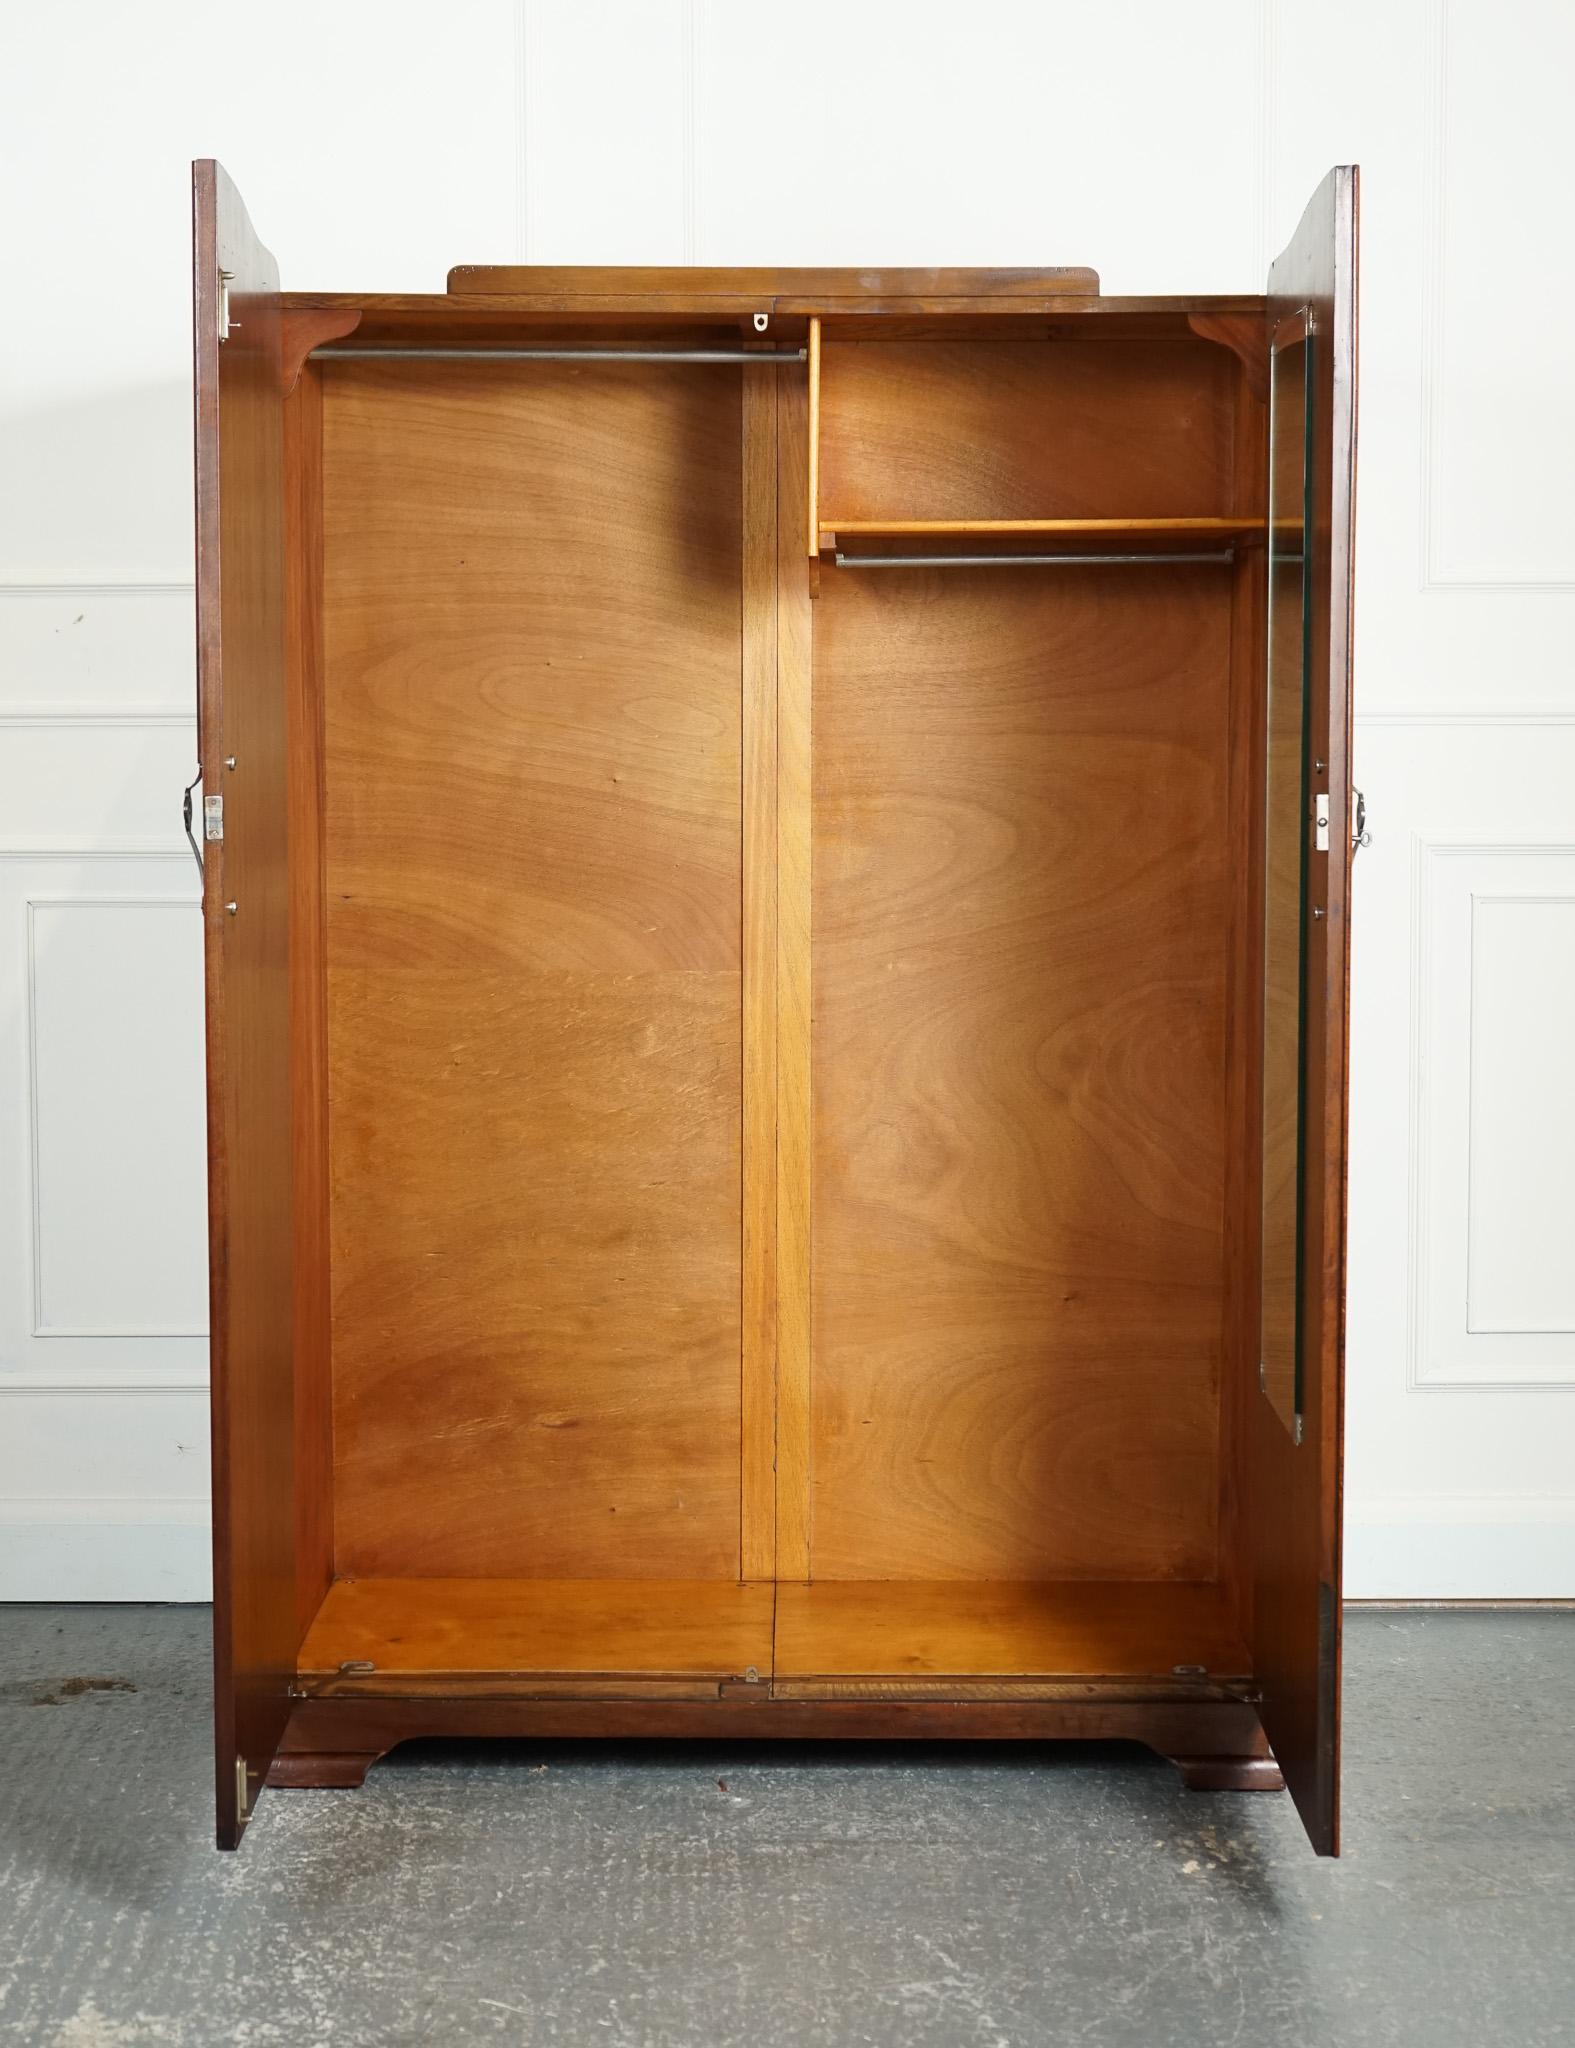 Hand-Crafted LOVELY ViNTAGE ART DECO WARDROBE J1 For Sale